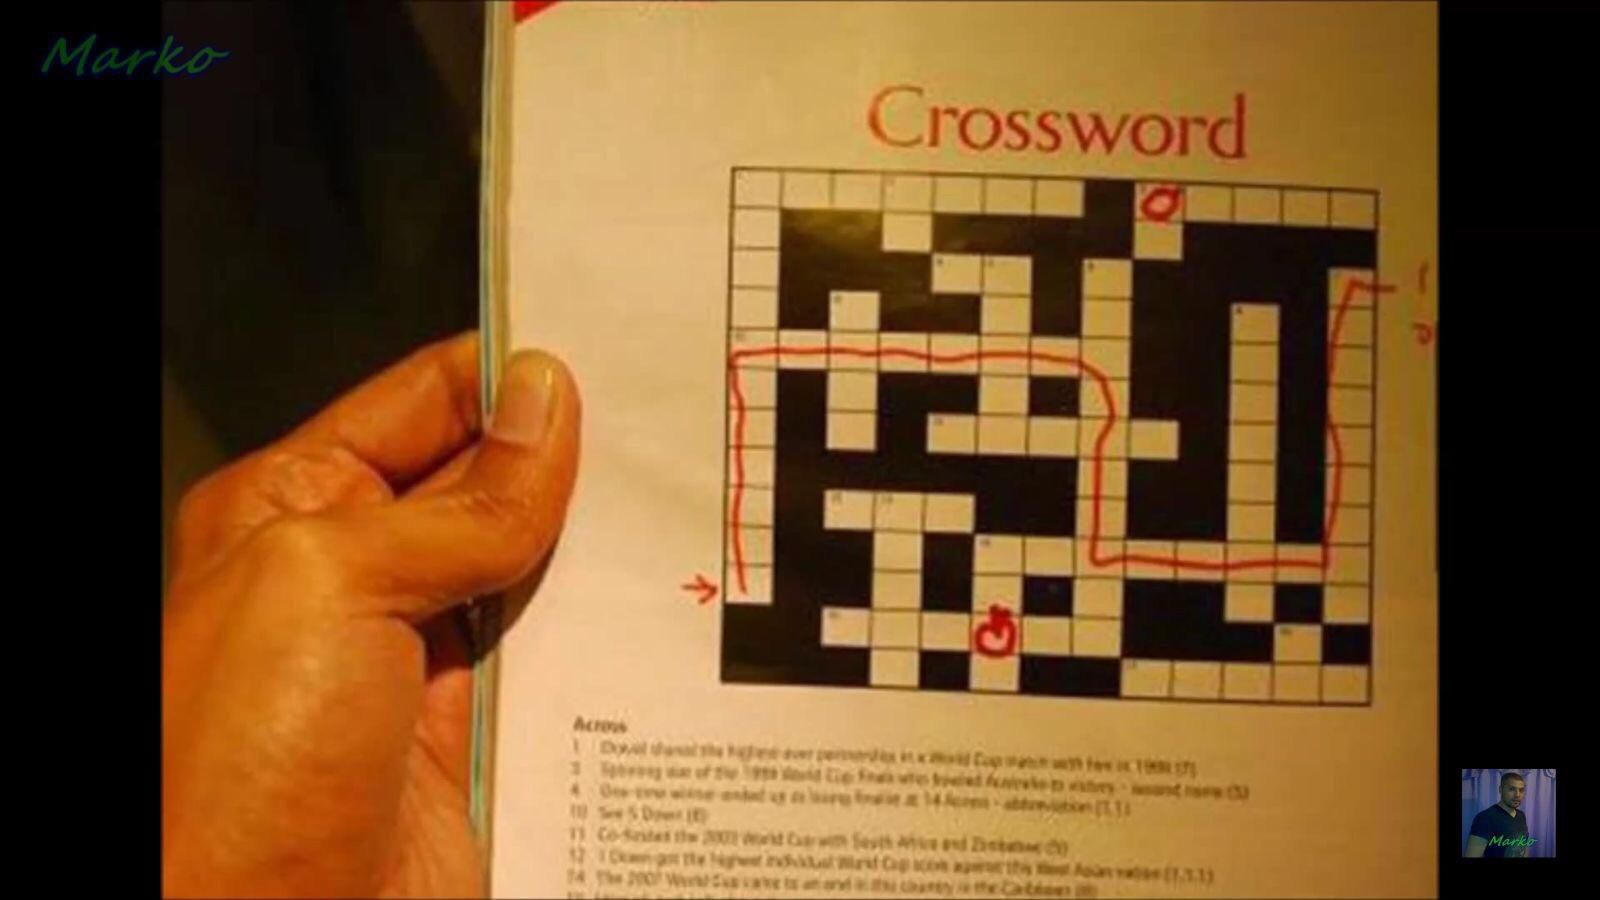 Look Dad, I solved it!